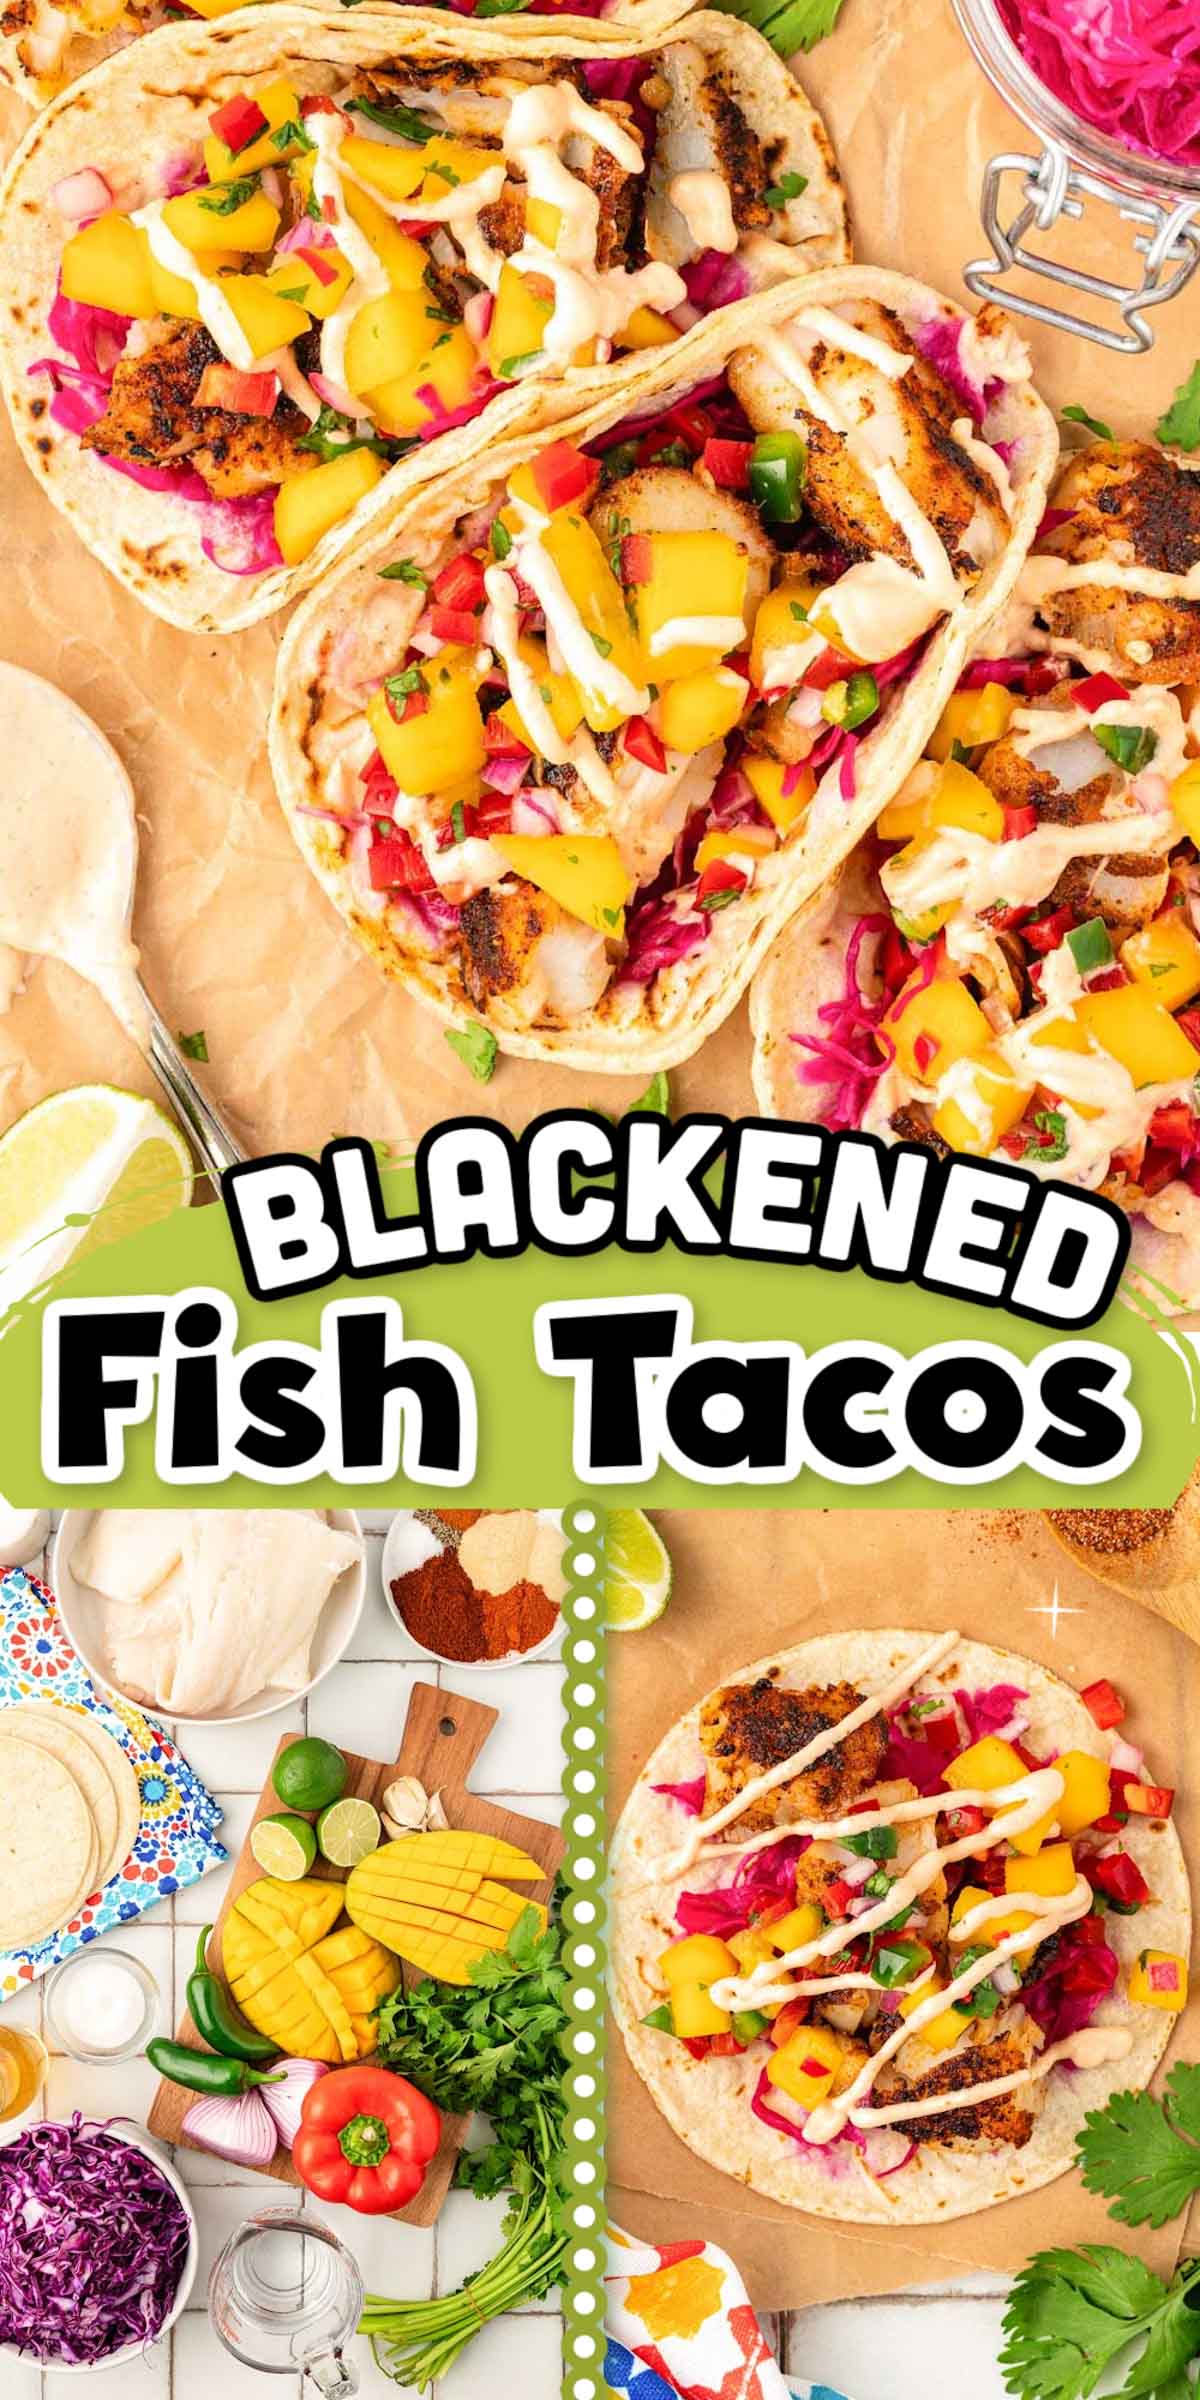 This simple, light, and easy recipe for Blackened Fish Tacos is a delicious dinner option everyone will go crazy for! Warm tortillas are stuffed with seasoned blacked fish, crunchy pickled cabbage, and a tropical spicy mango salsa! via @sugarandsoulco